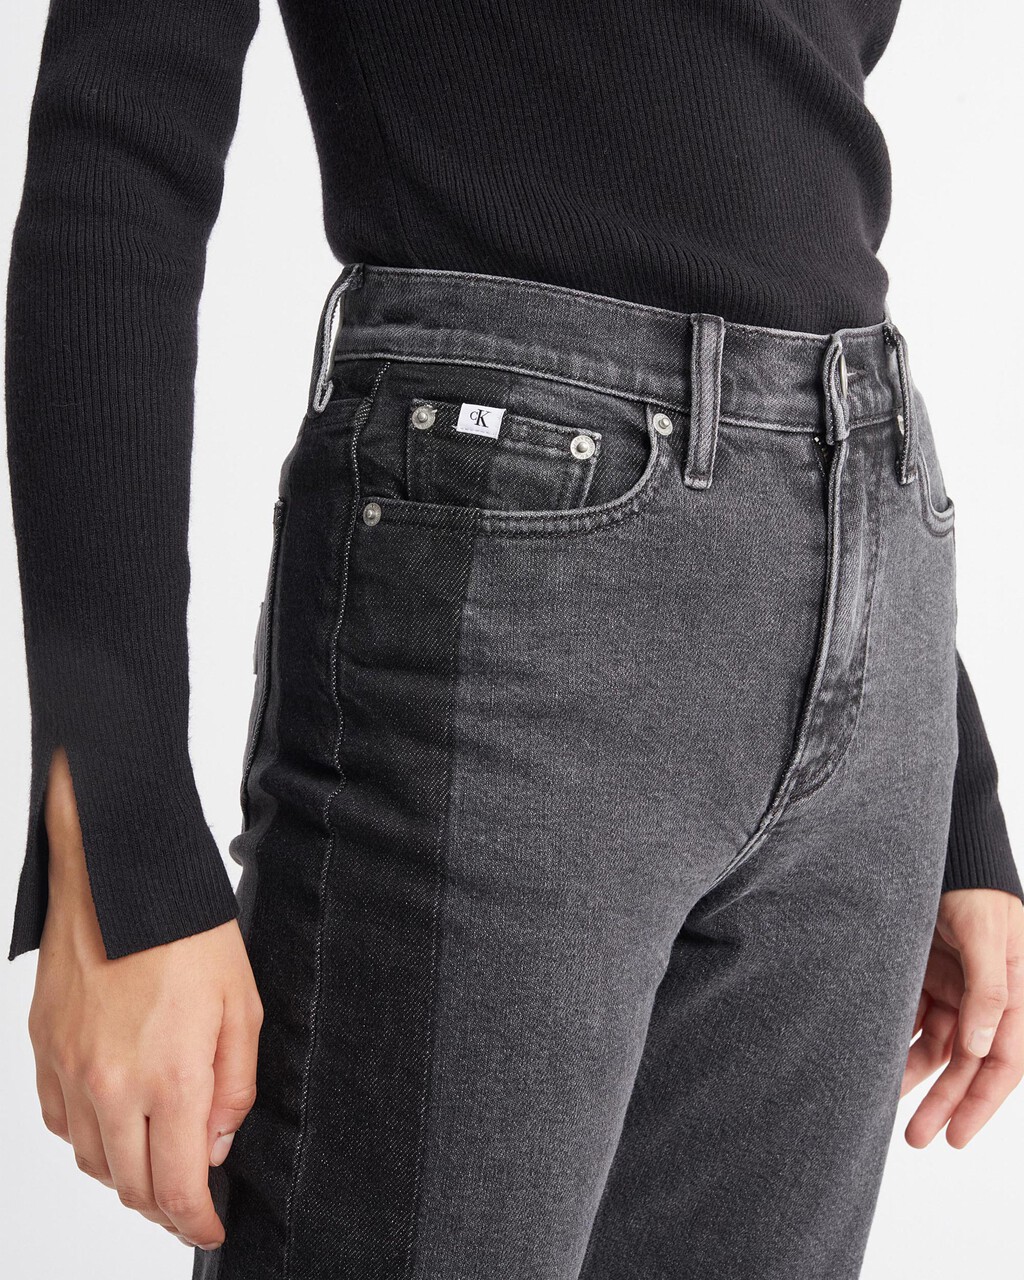 TWO TONE BLACK HIGH RISE STRAIGHT ANKLE JEANS, Washed Black Blocked, hi-res